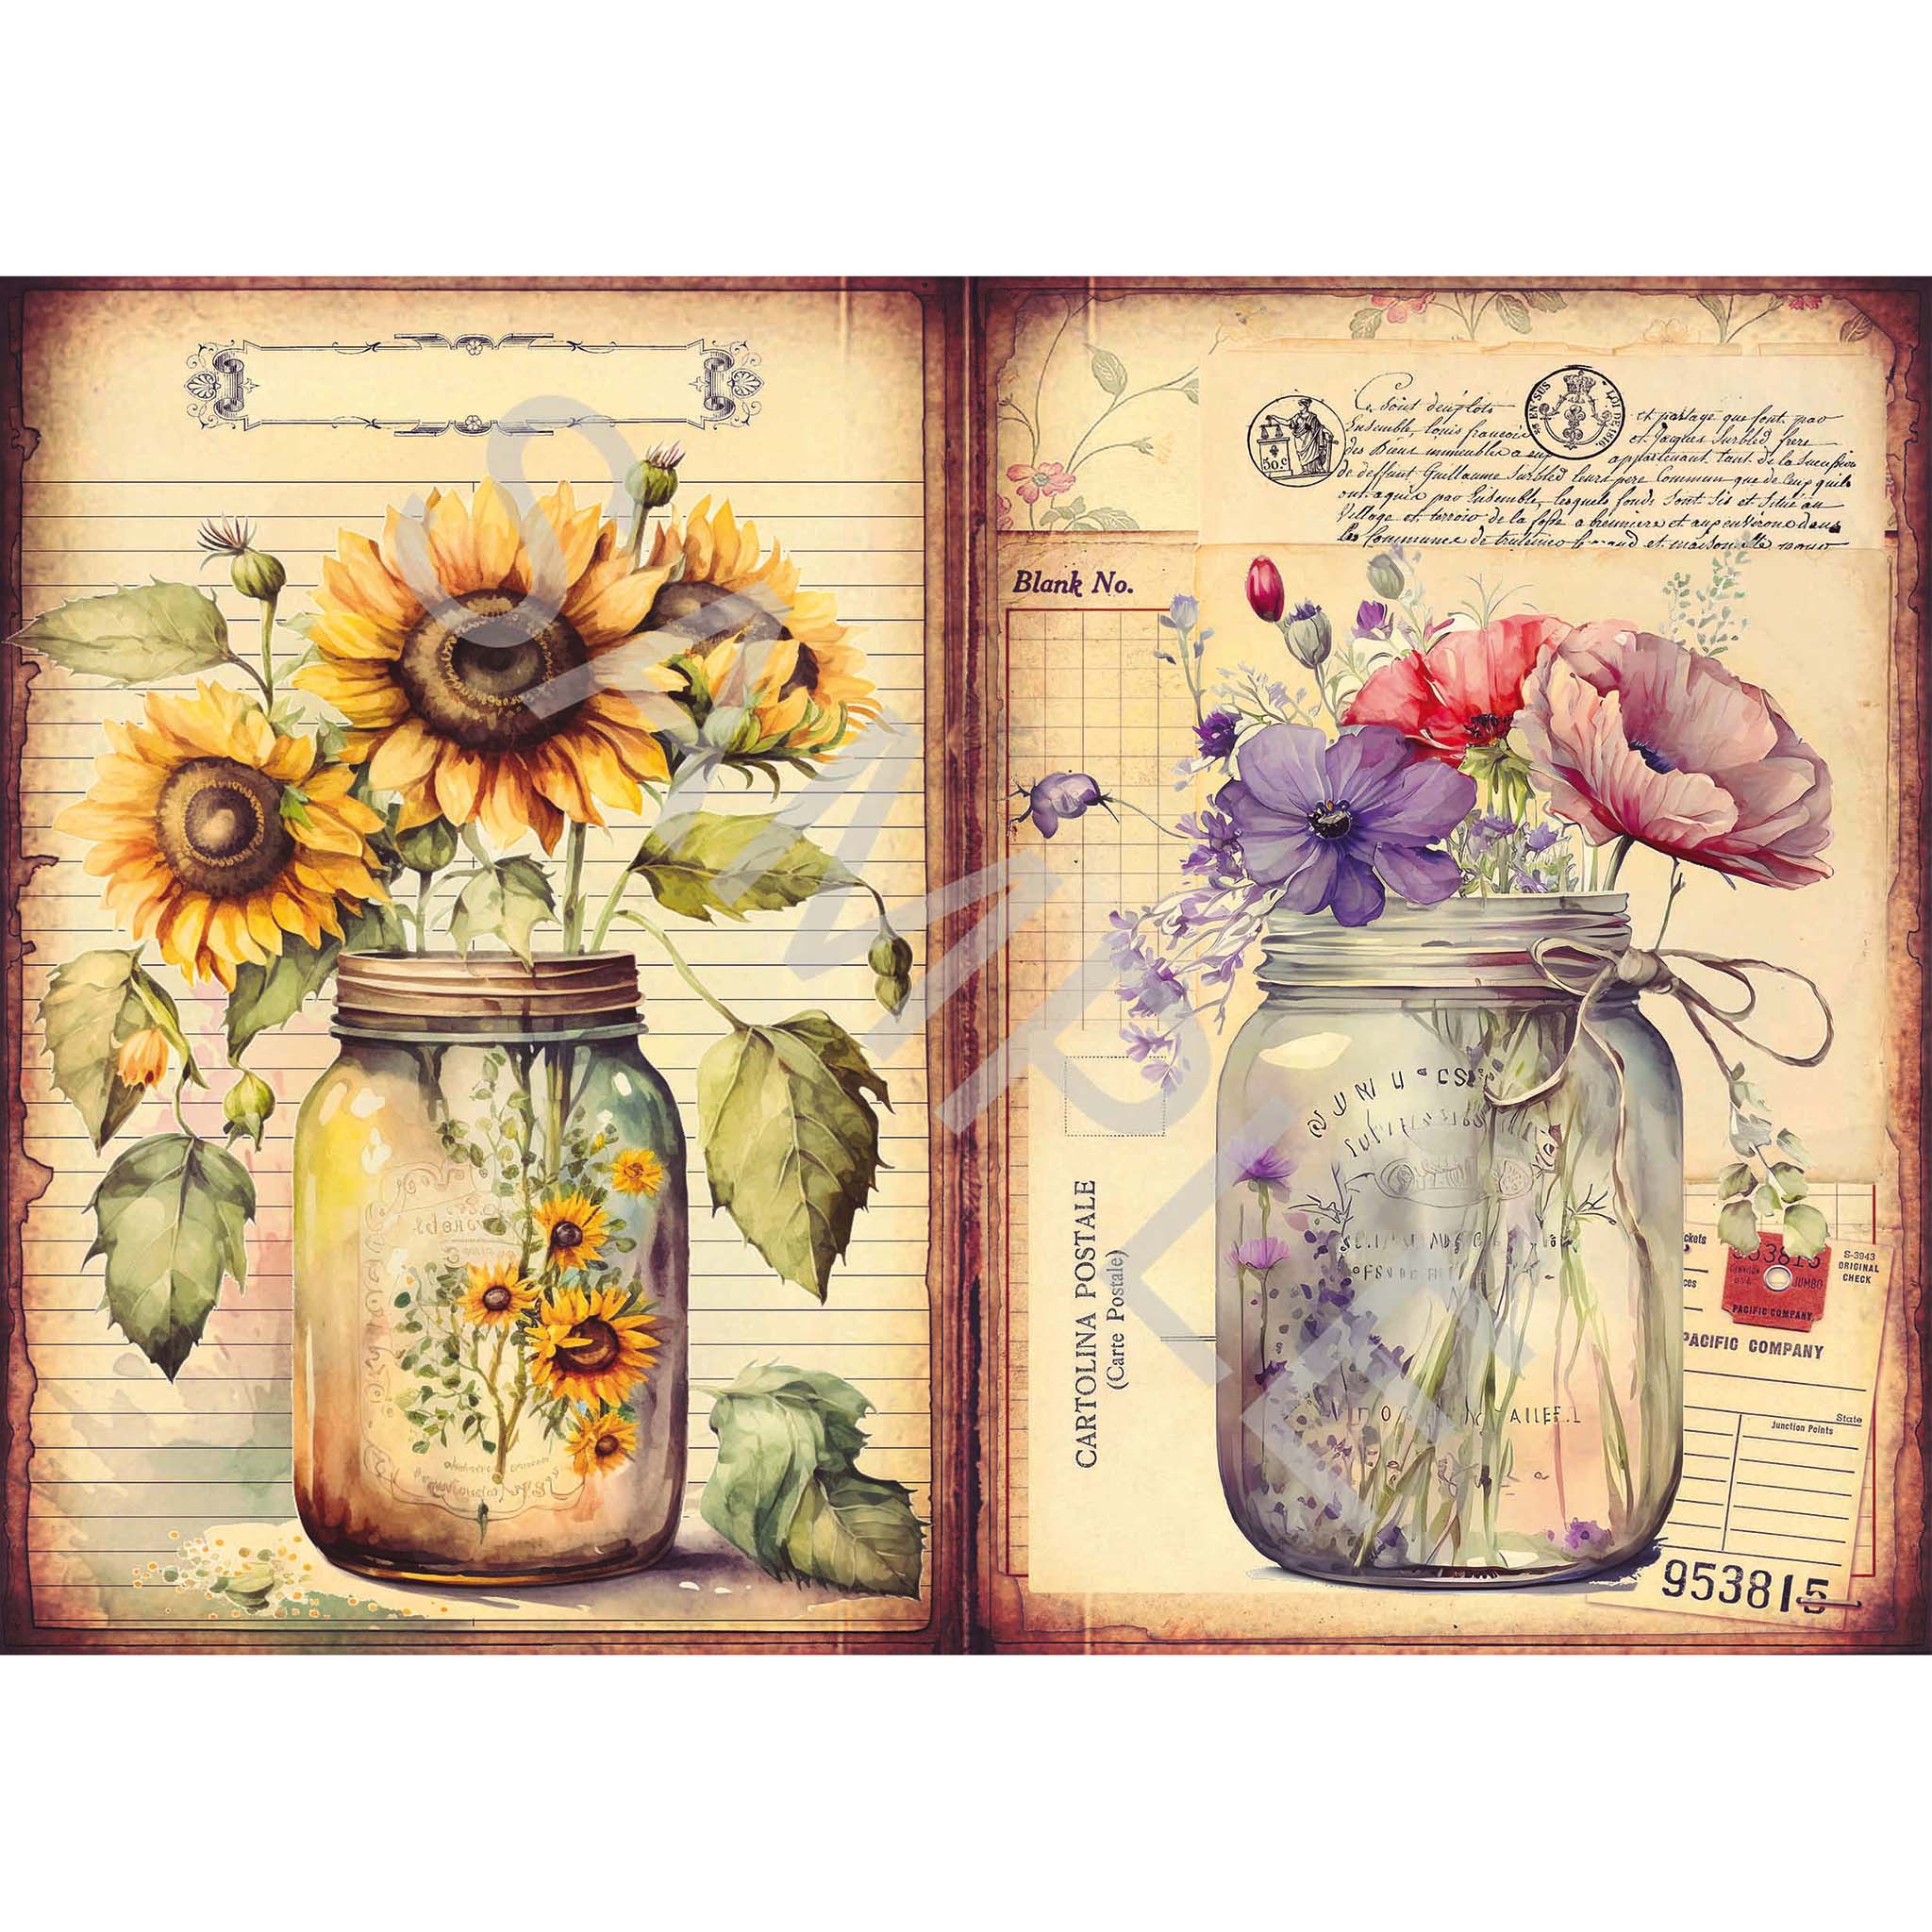 A4 rice paper design that features two charming images of flowers in vintage mason jars against old documents, one with sunflowers and the other with wildflowers. White borders are on the top and bottom.